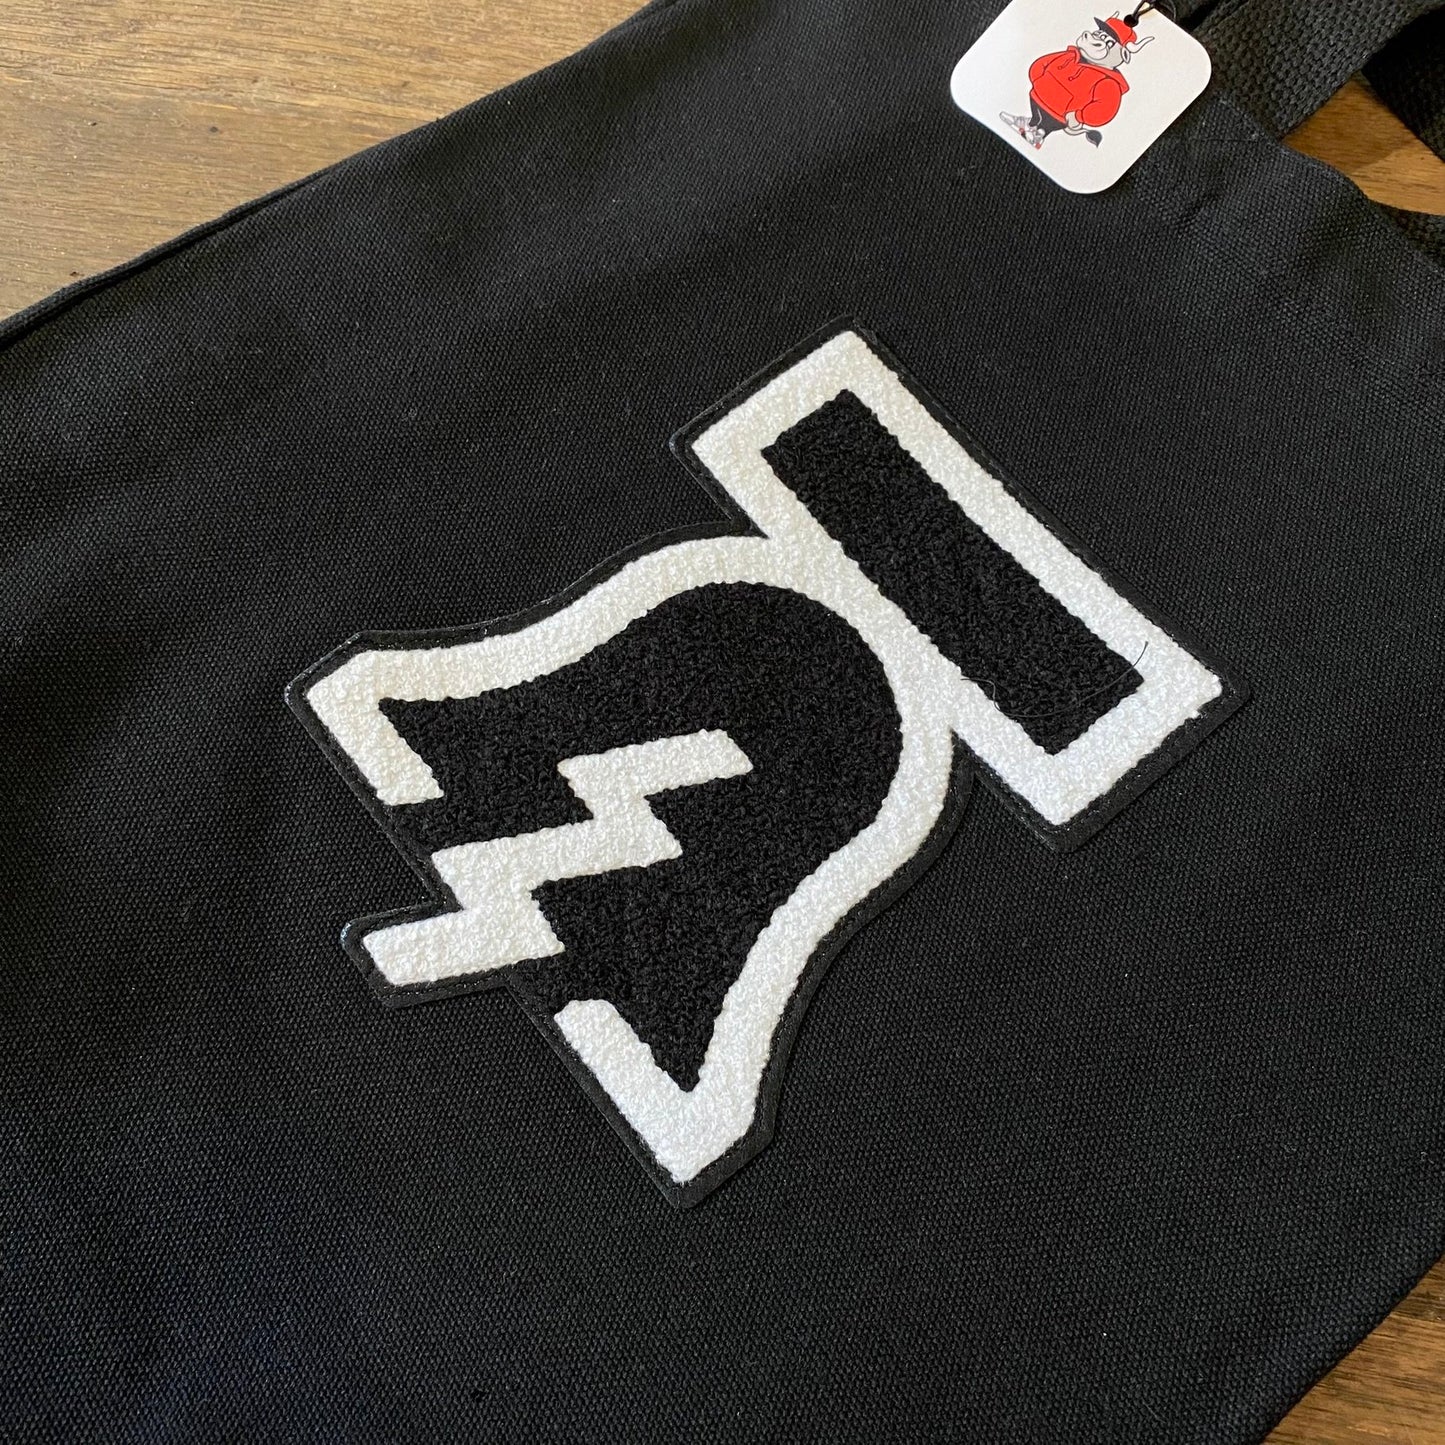 Bell & Bolt Patch Tote Bag with a white and black thumbs-down patch and a tag with a red character by Tote Jawn.